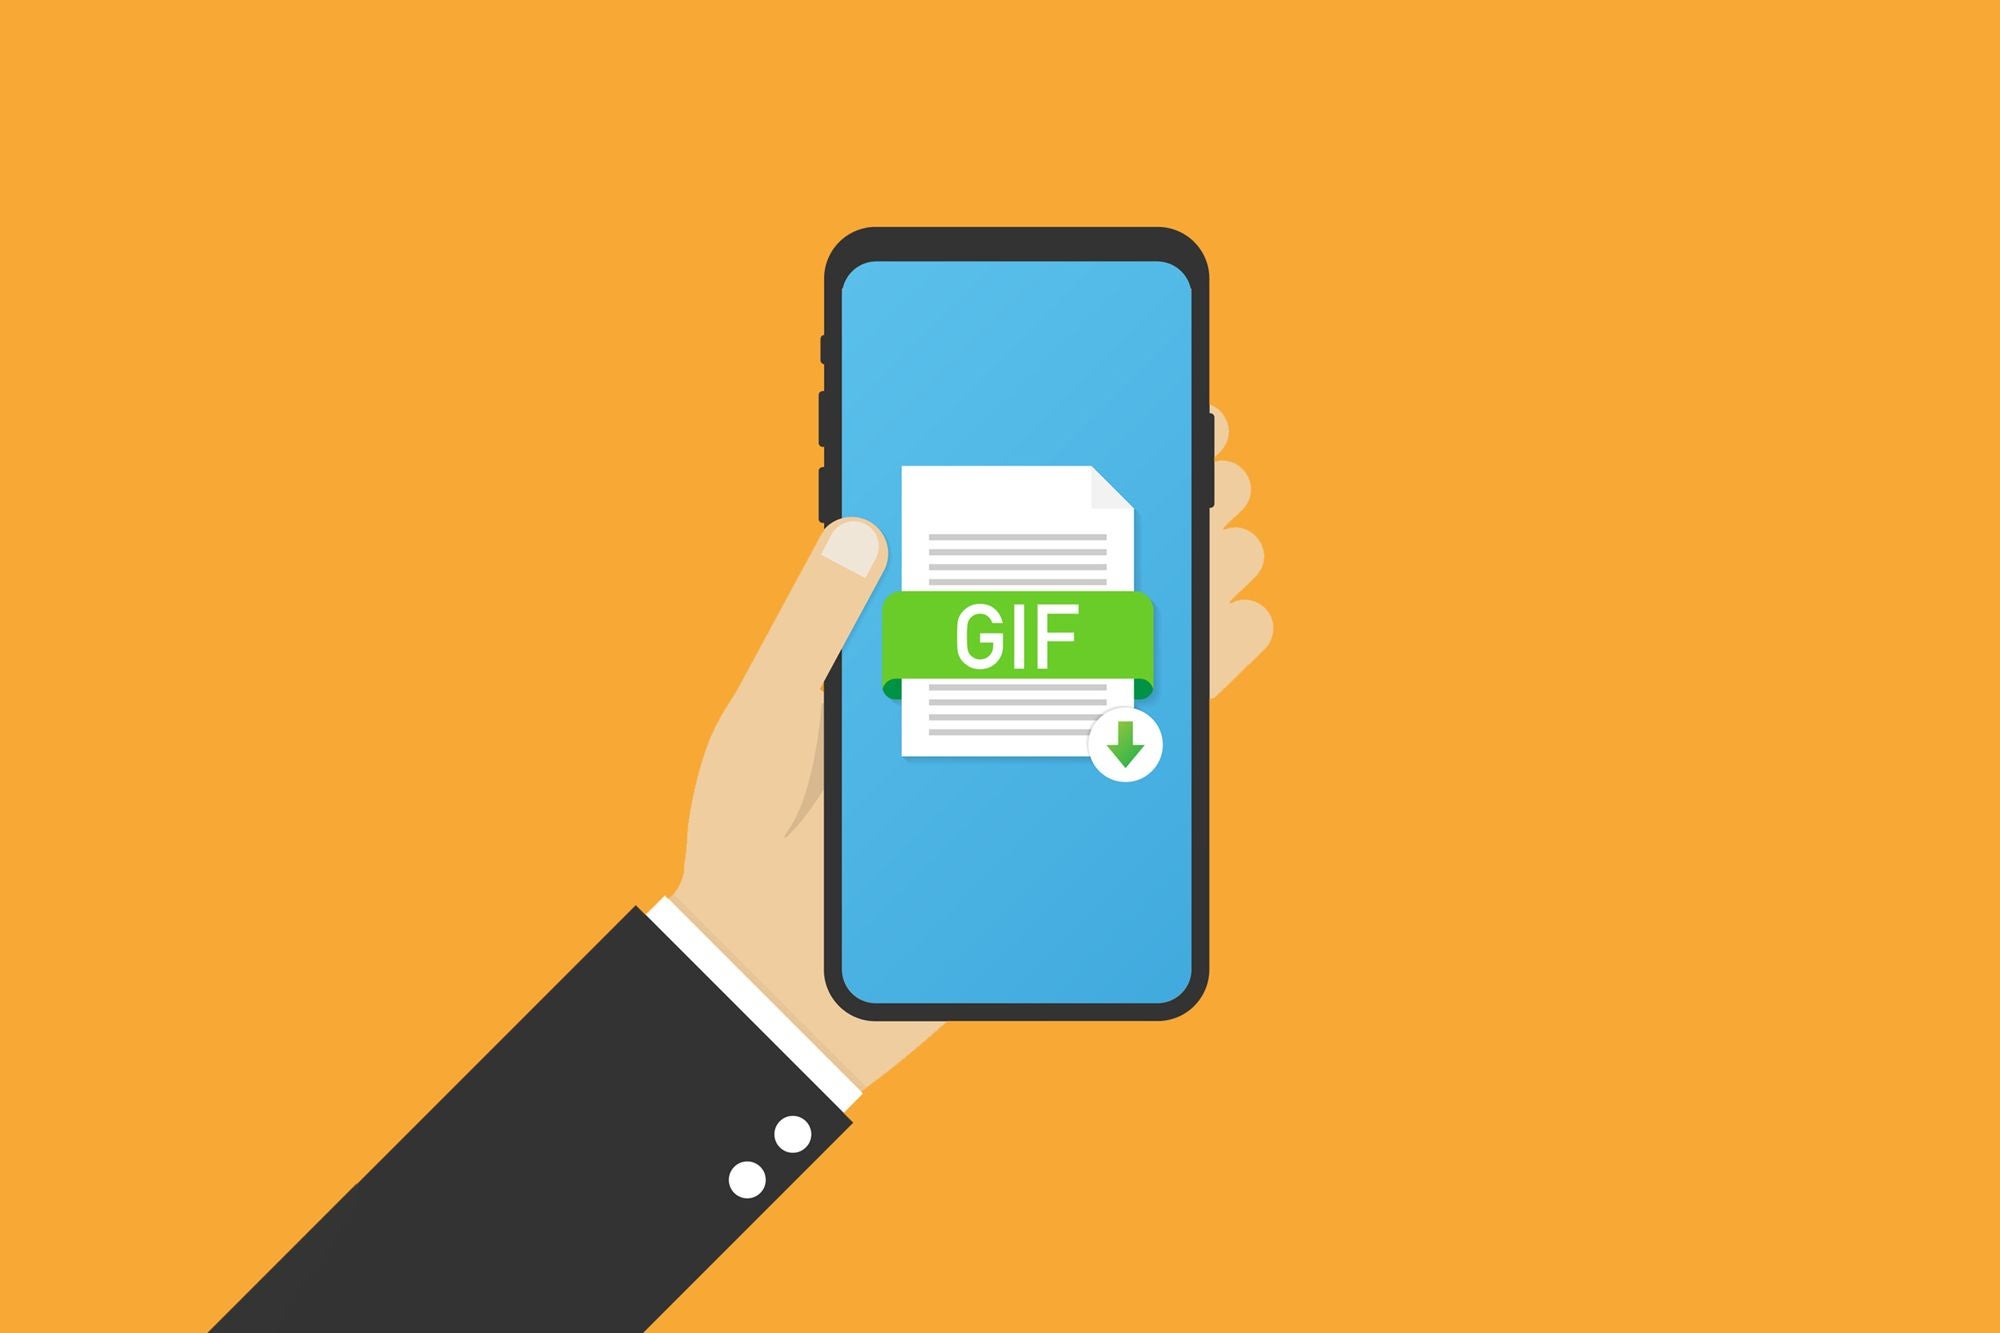 Animating the Web: A Guide to Creating Engaging GIFs for Social Media